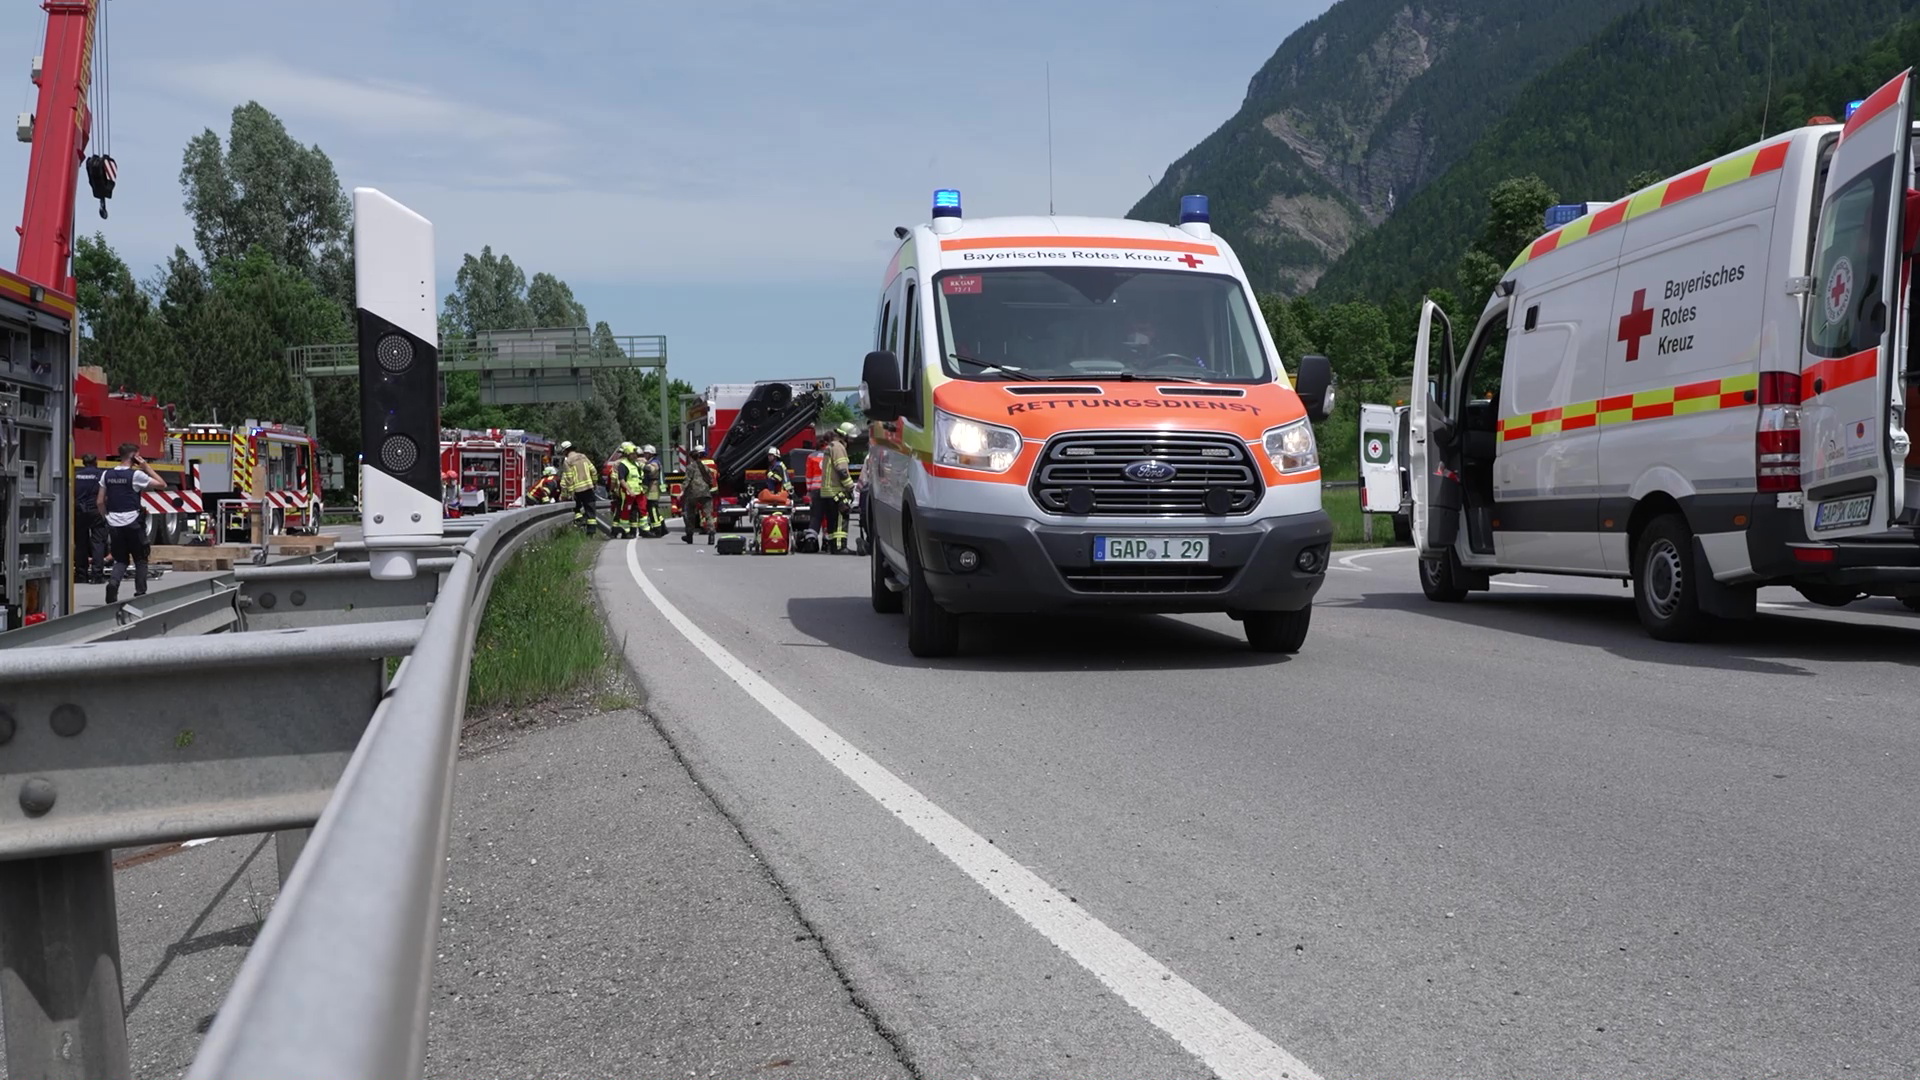 epa09993811 Emergency responders and firefighters work at the scene of a train derailment in Burgrain, near the resort town of Garmisch-Partenkirchen, southern Germany, 03 June 2022. According to the police and local officials, at least 3 people are reported dead and dozens were injured  in the train derailment. The regional train was heading north from the German Alps towards Munich.  EPA/NETWORK PICTURES